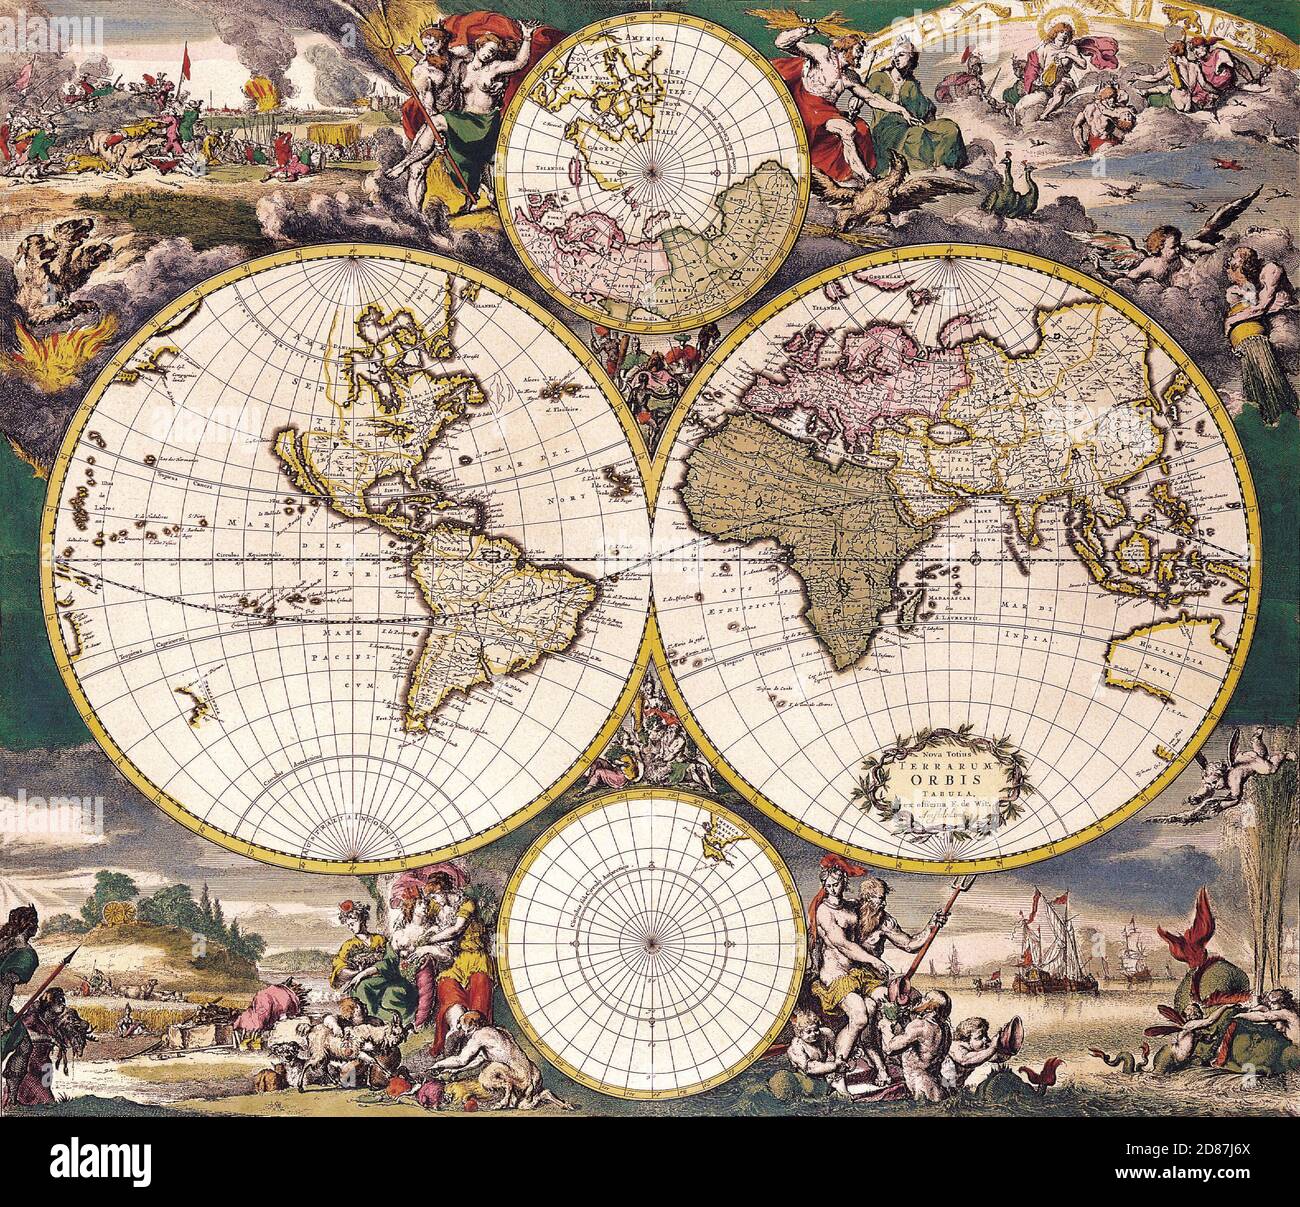 Illustrated old map of the World, vintage style full of details Stock Photo